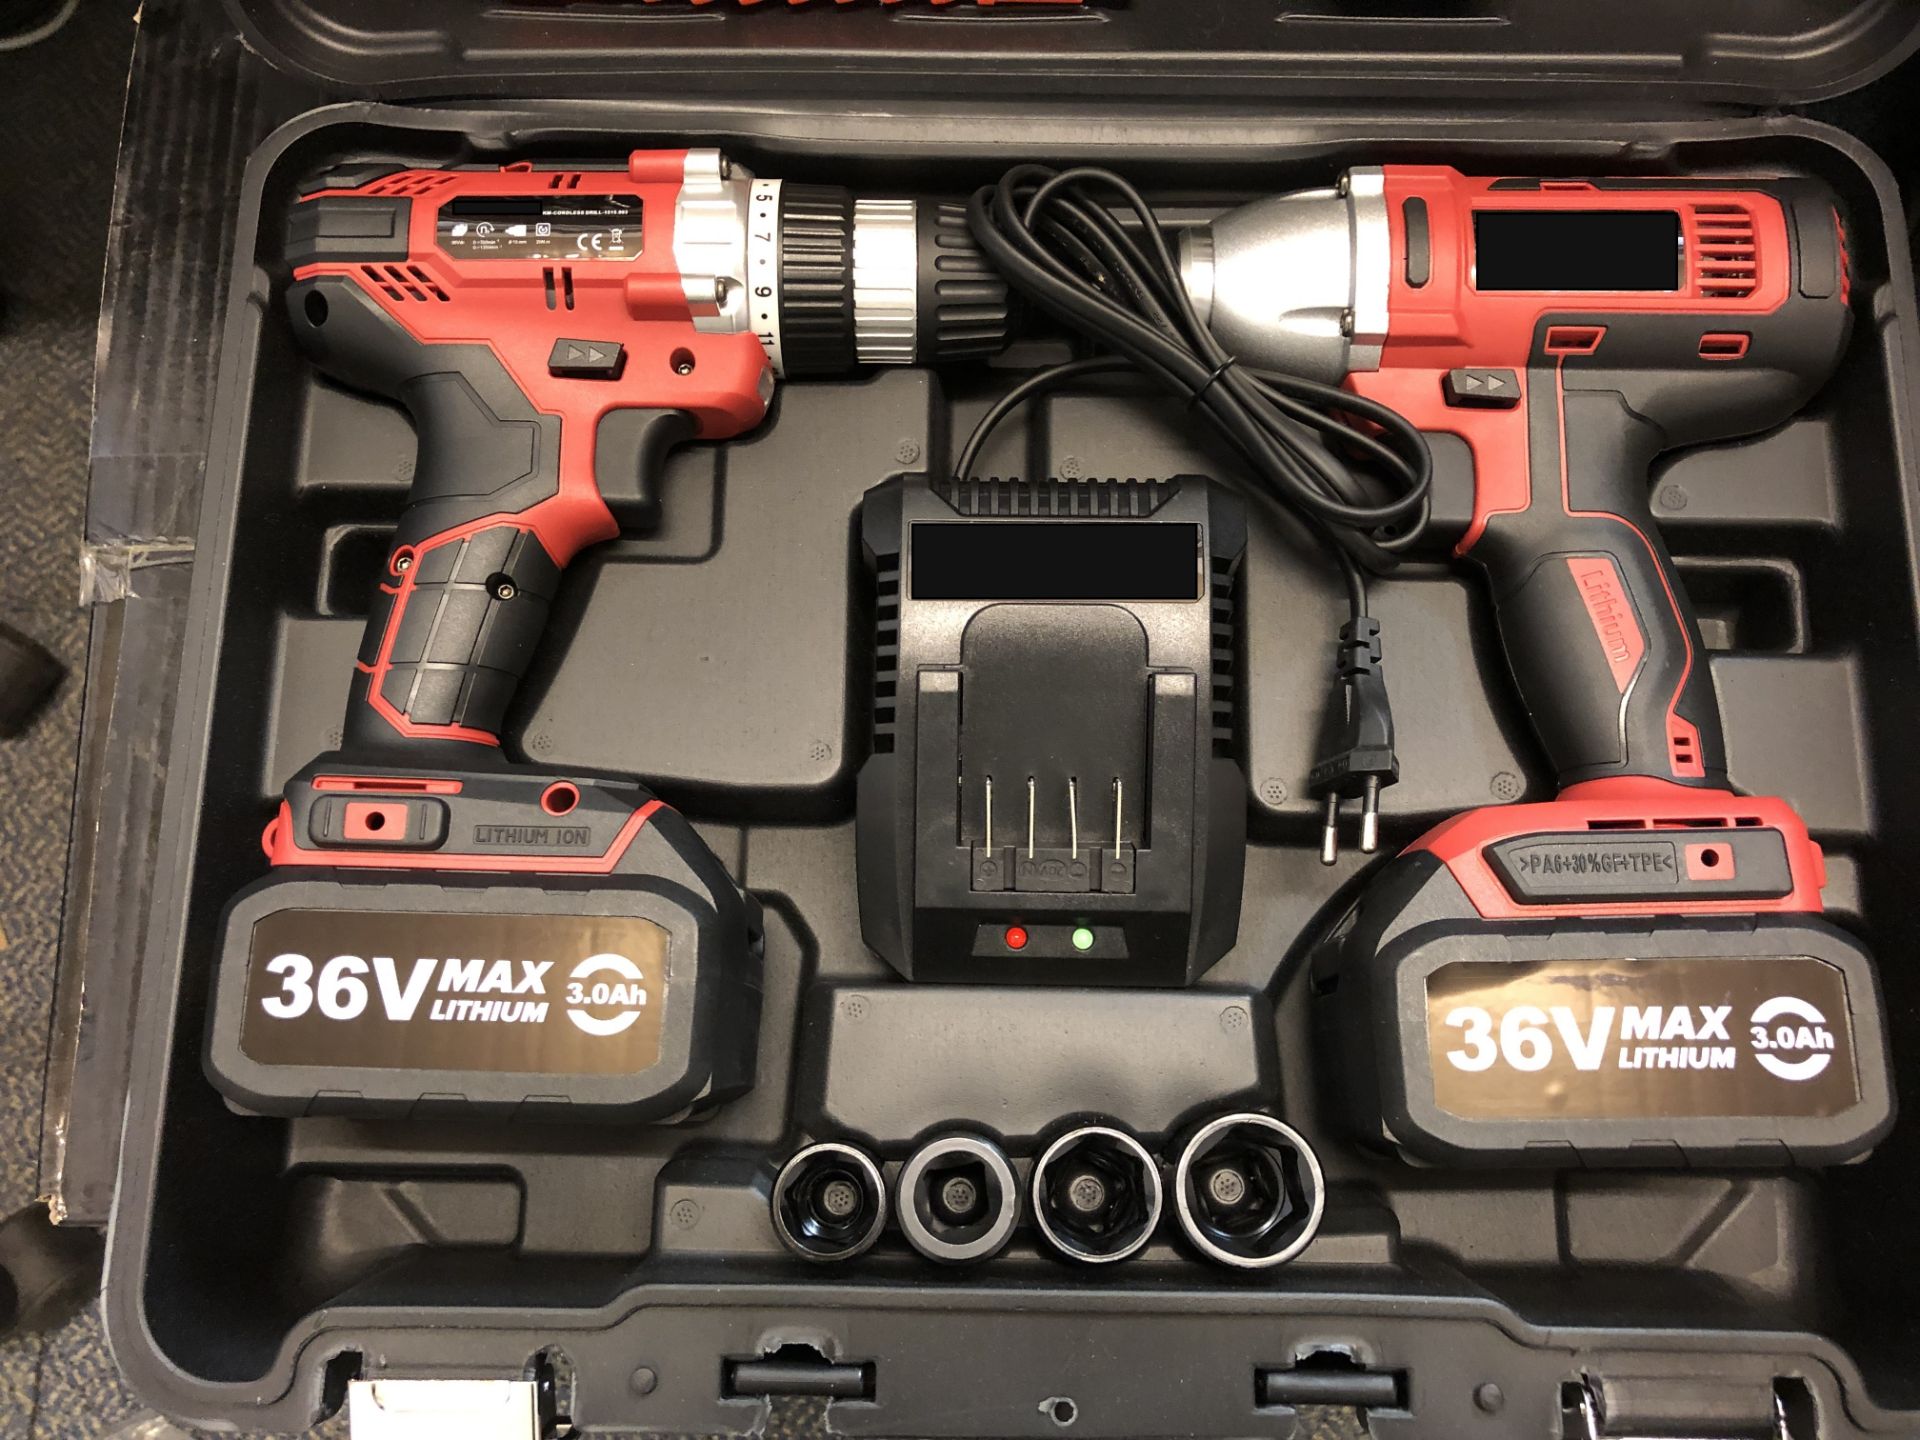 V Brand New 36V Twin Pack Cordless Drill/Driver And Cordless Impact Driver - 1 Hour Charge - 3.0Ah - Image 3 of 3